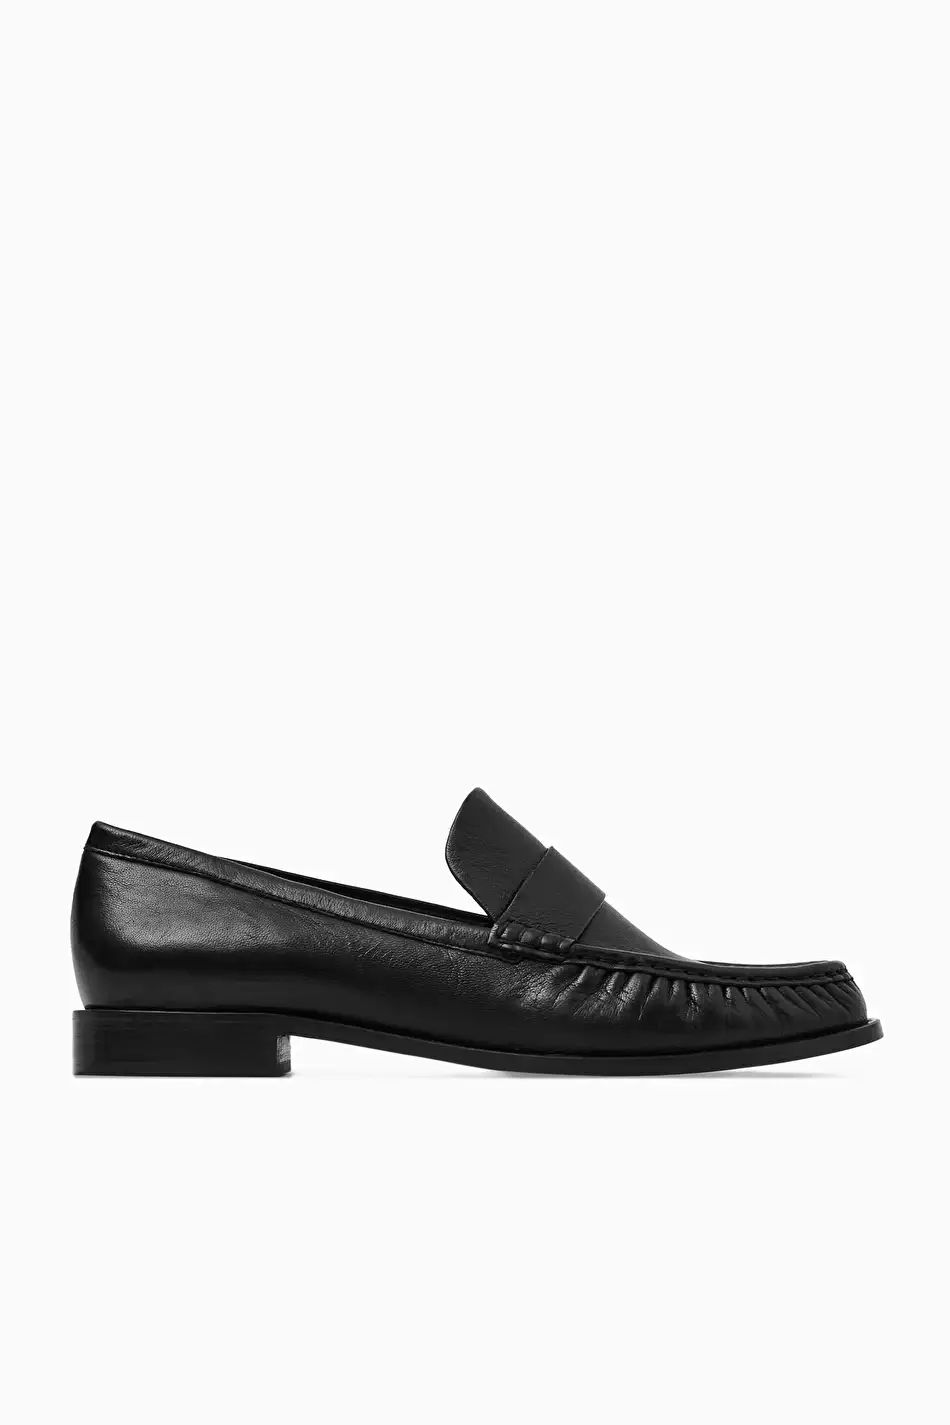 LEATHER LOAFERS - BLACK - COS | COS UK